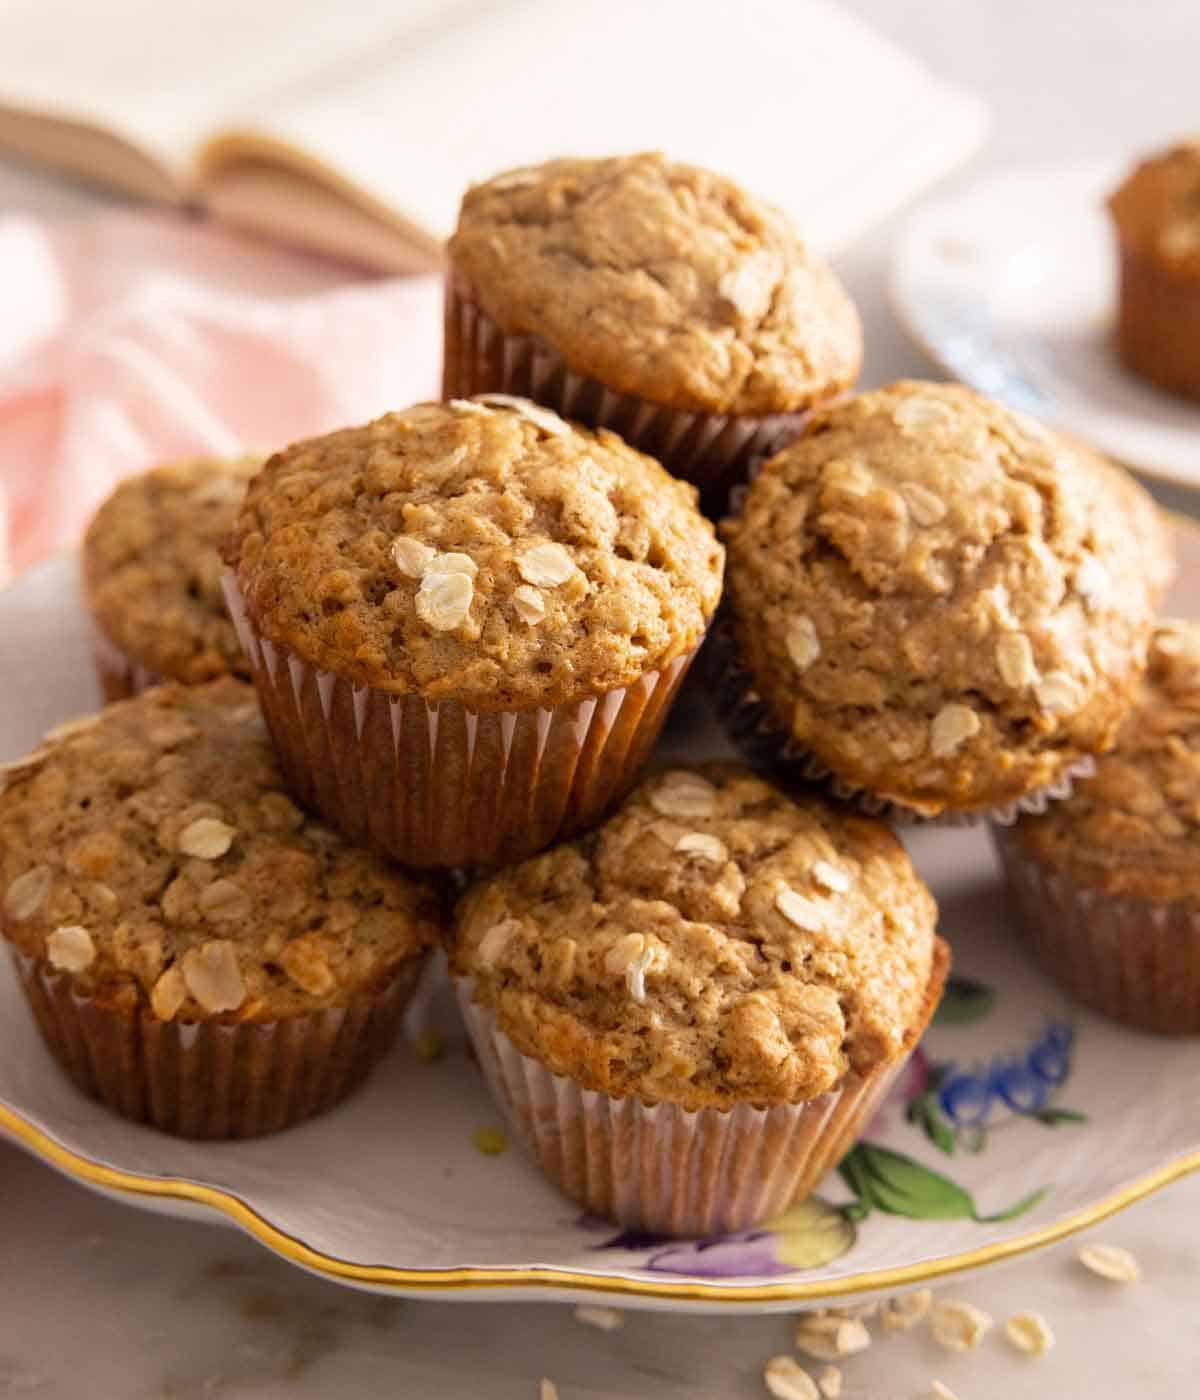 A platter of a pile of oatmeal muffins.